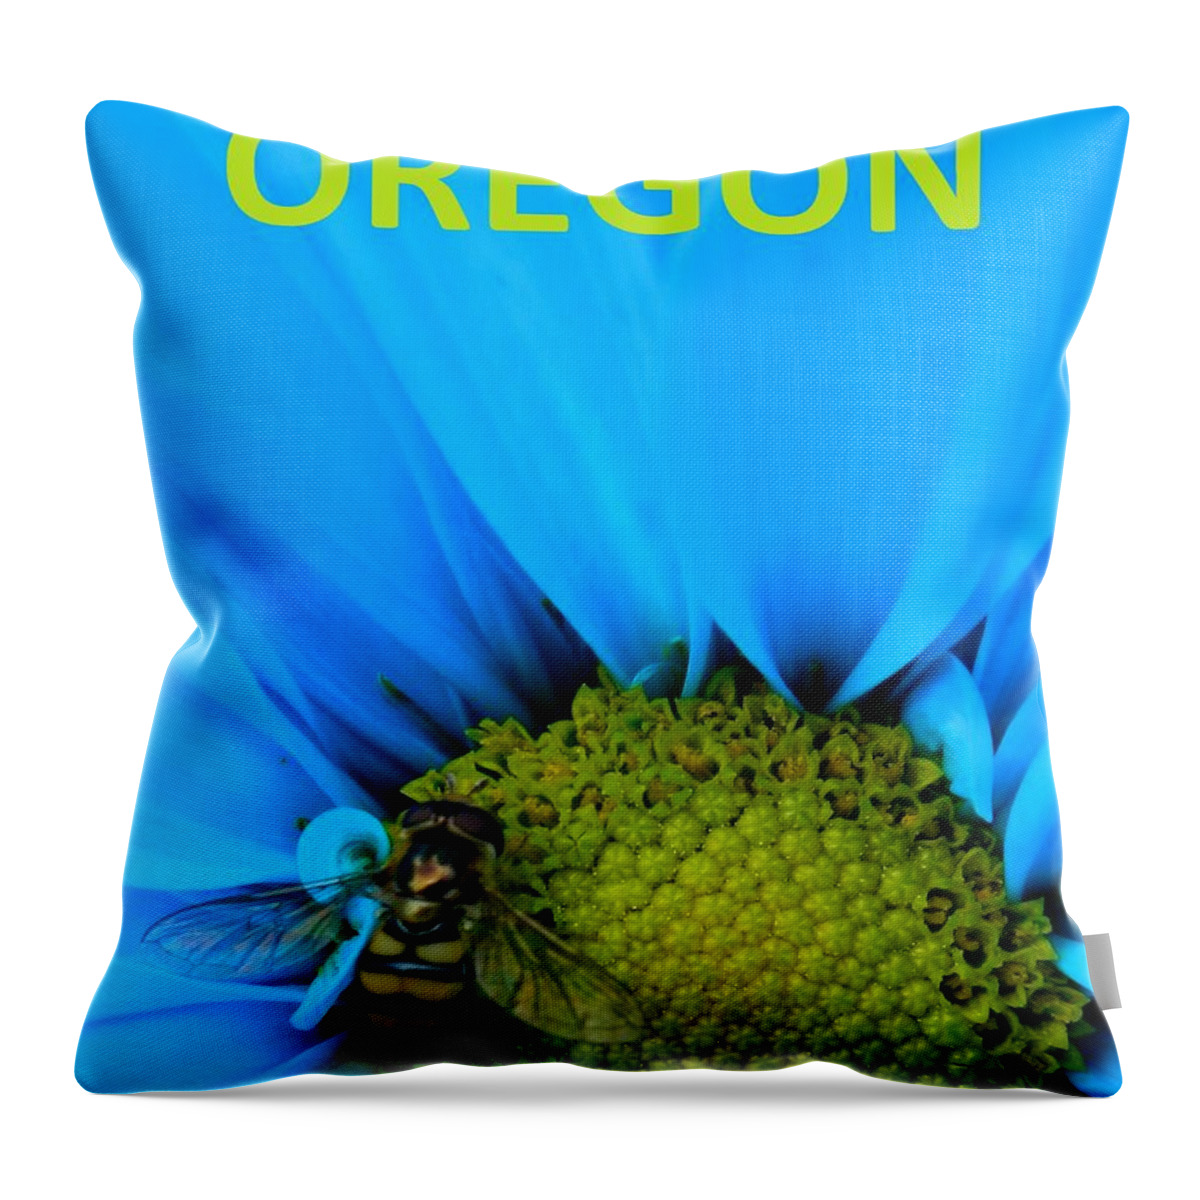 Oregon Throw Pillow featuring the photograph Oregon Bee by Gallery Of Hope 